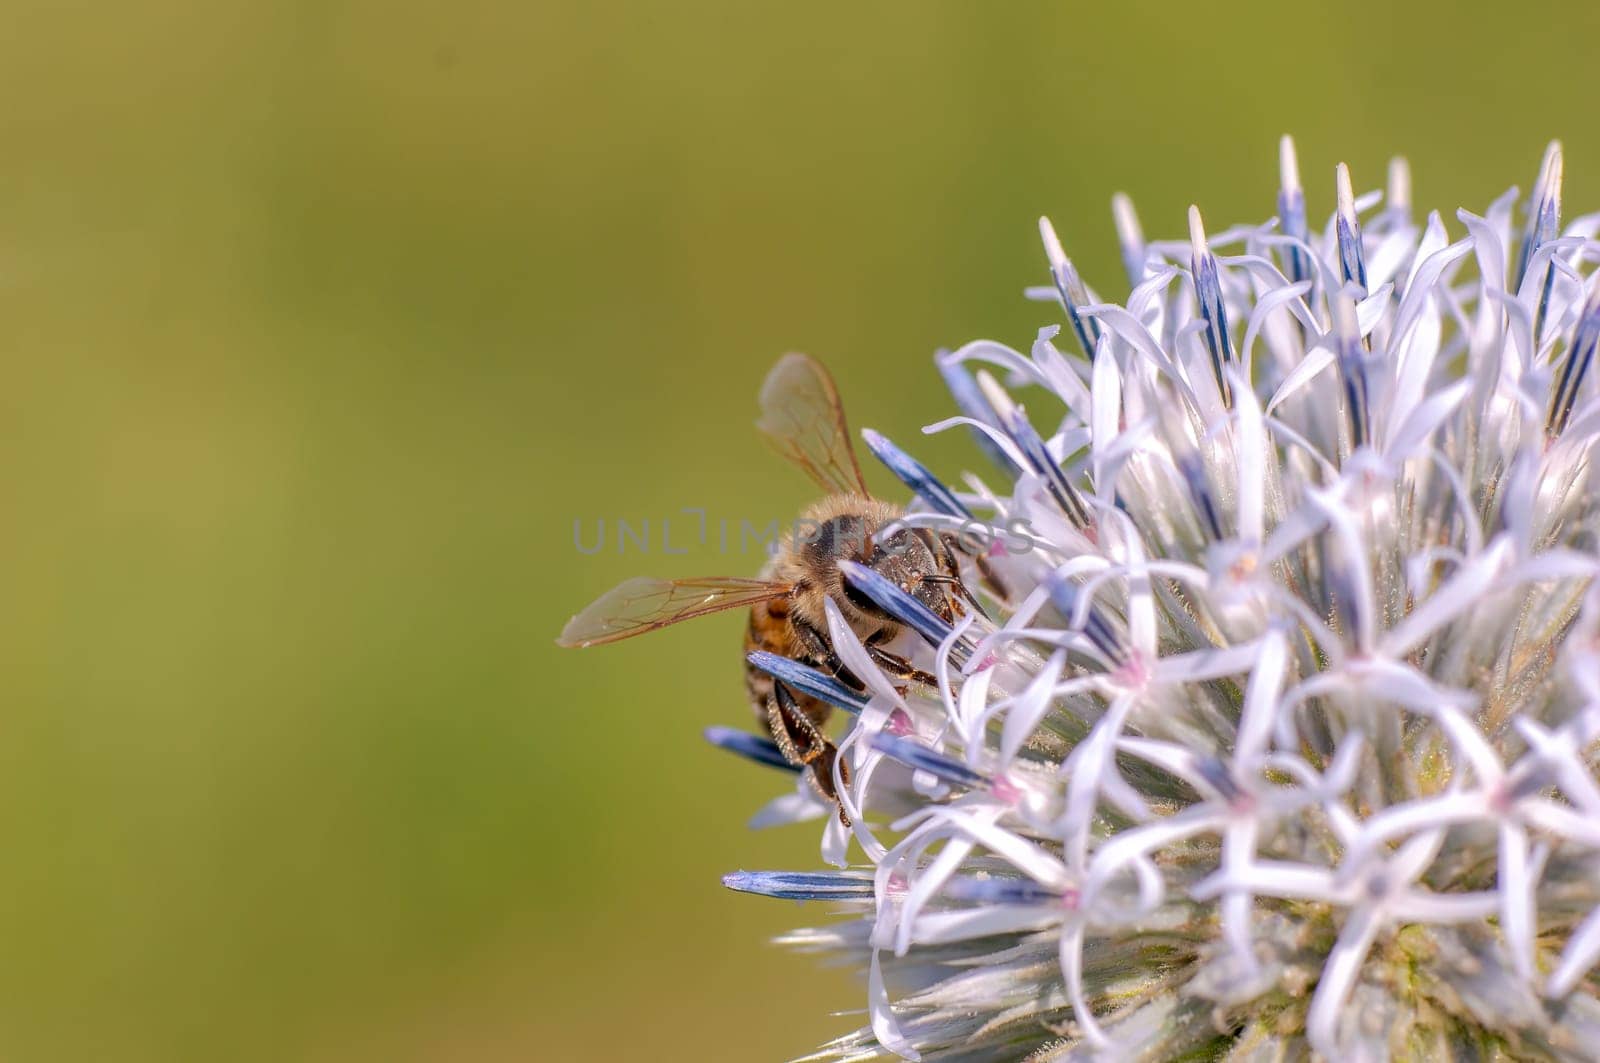 a bee sits on a purple thistle flower and nibbles necktar